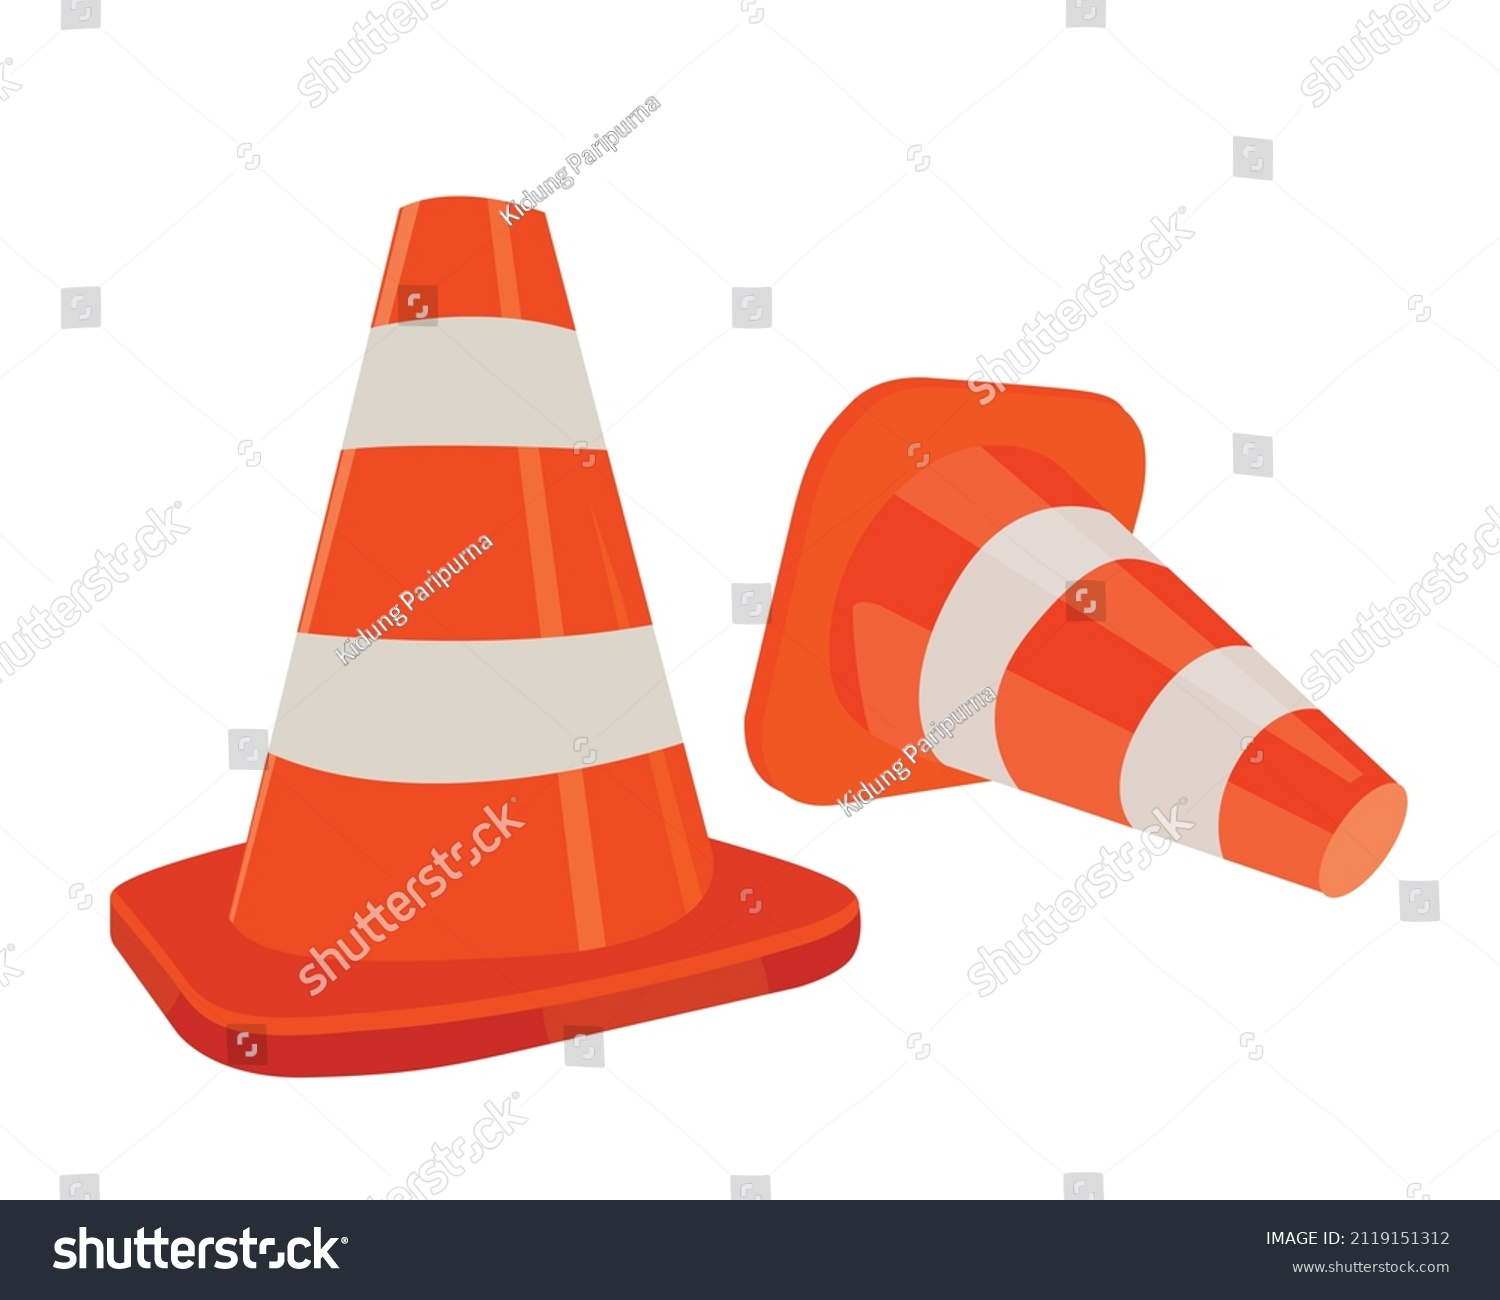 Vector illustration of plastic barrier and traffic cone and helm, construction and safety tool, white and orange traffic cone, red plastic barrier blocking pathway #2119151312